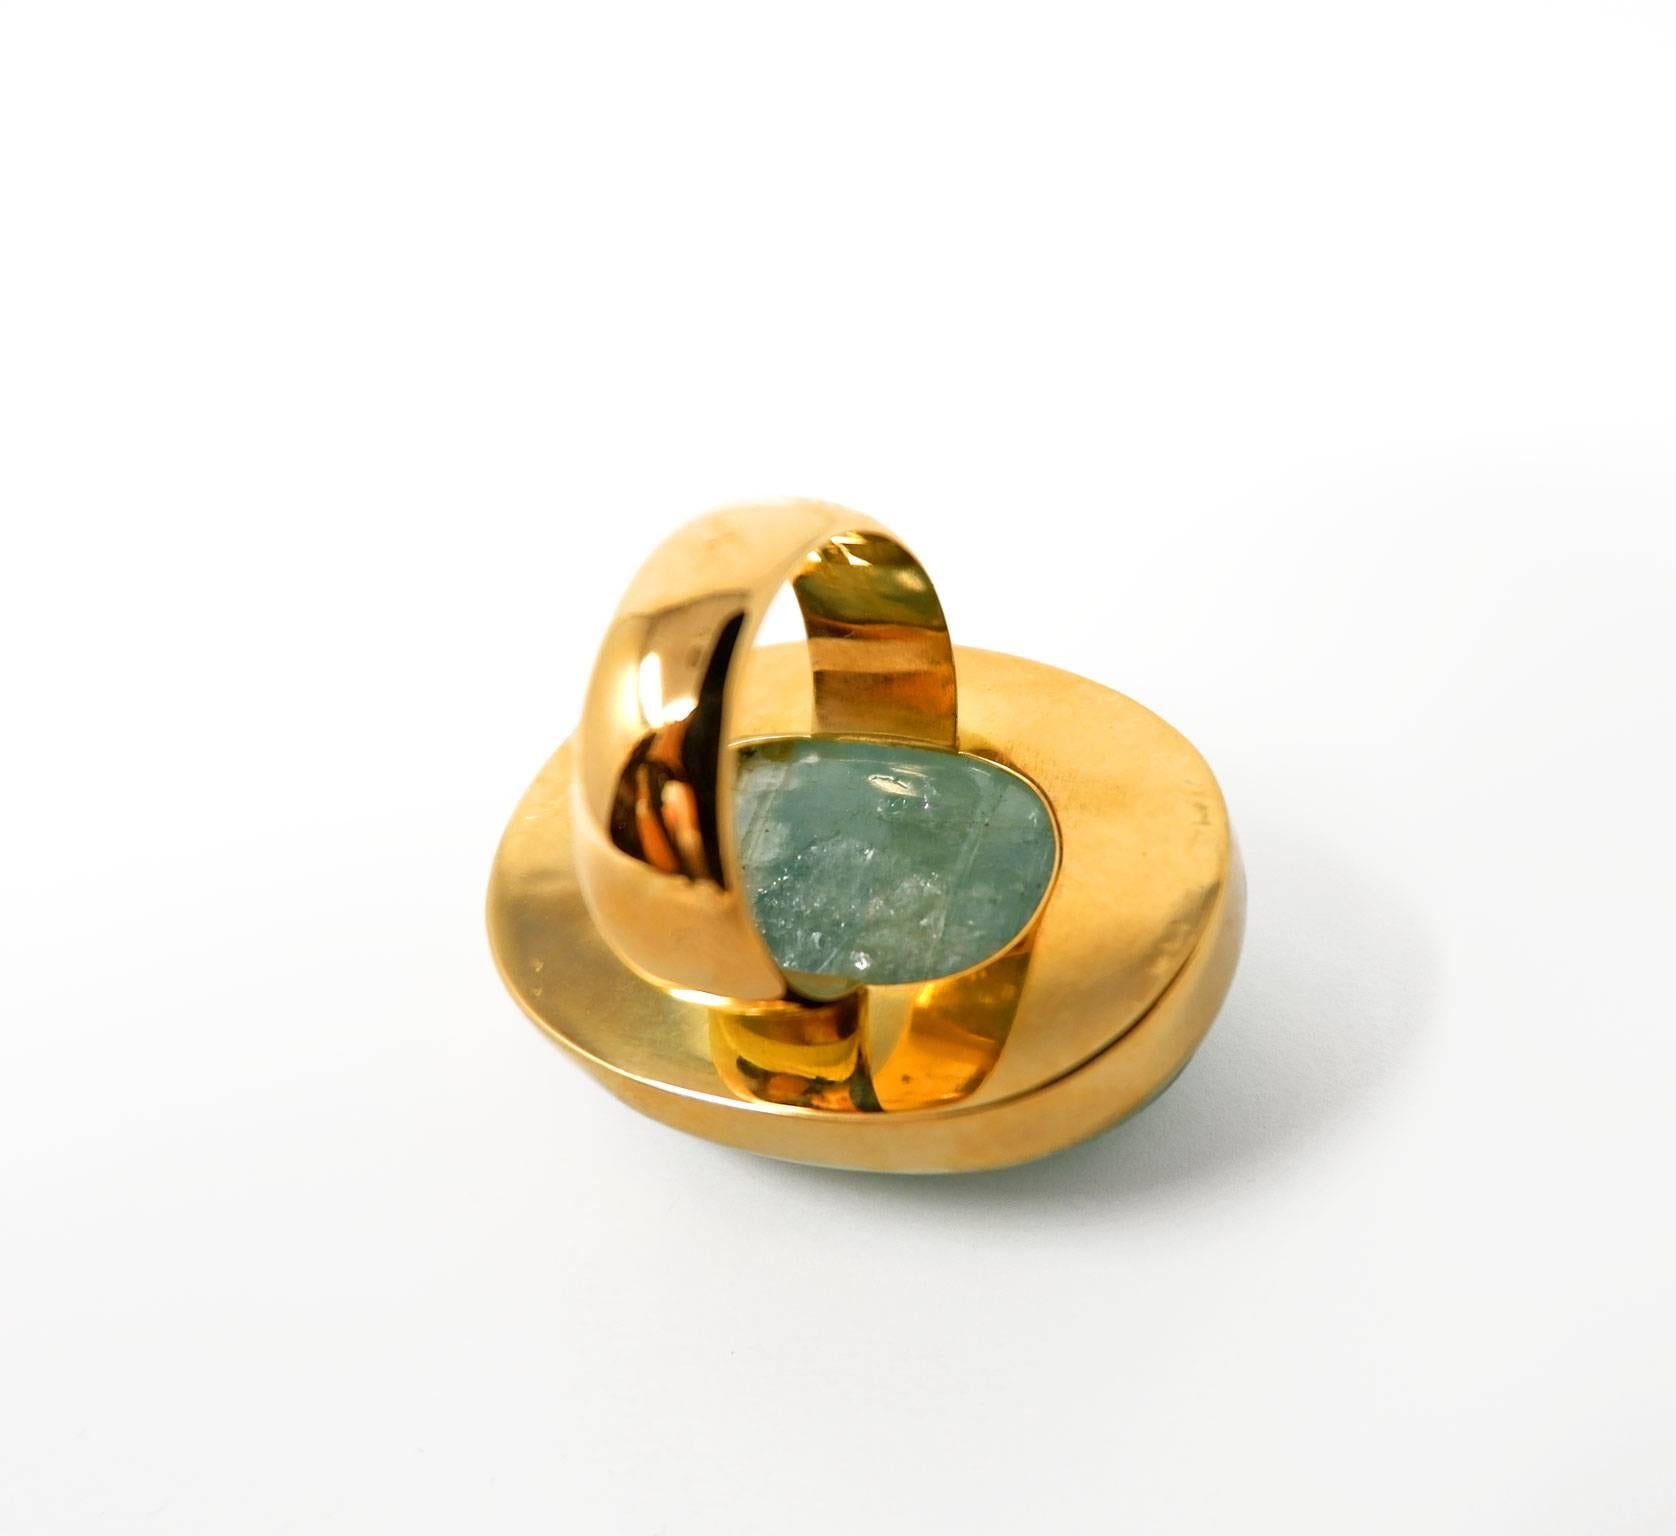 A spectacular 18 karat gold ring with a giant Indian carved aquamarine featuring a floral motif.  The exquisite art of gem carving has formed a part of India's cultural heritage for centuries. In this jewel this ancient tradition is fused with a